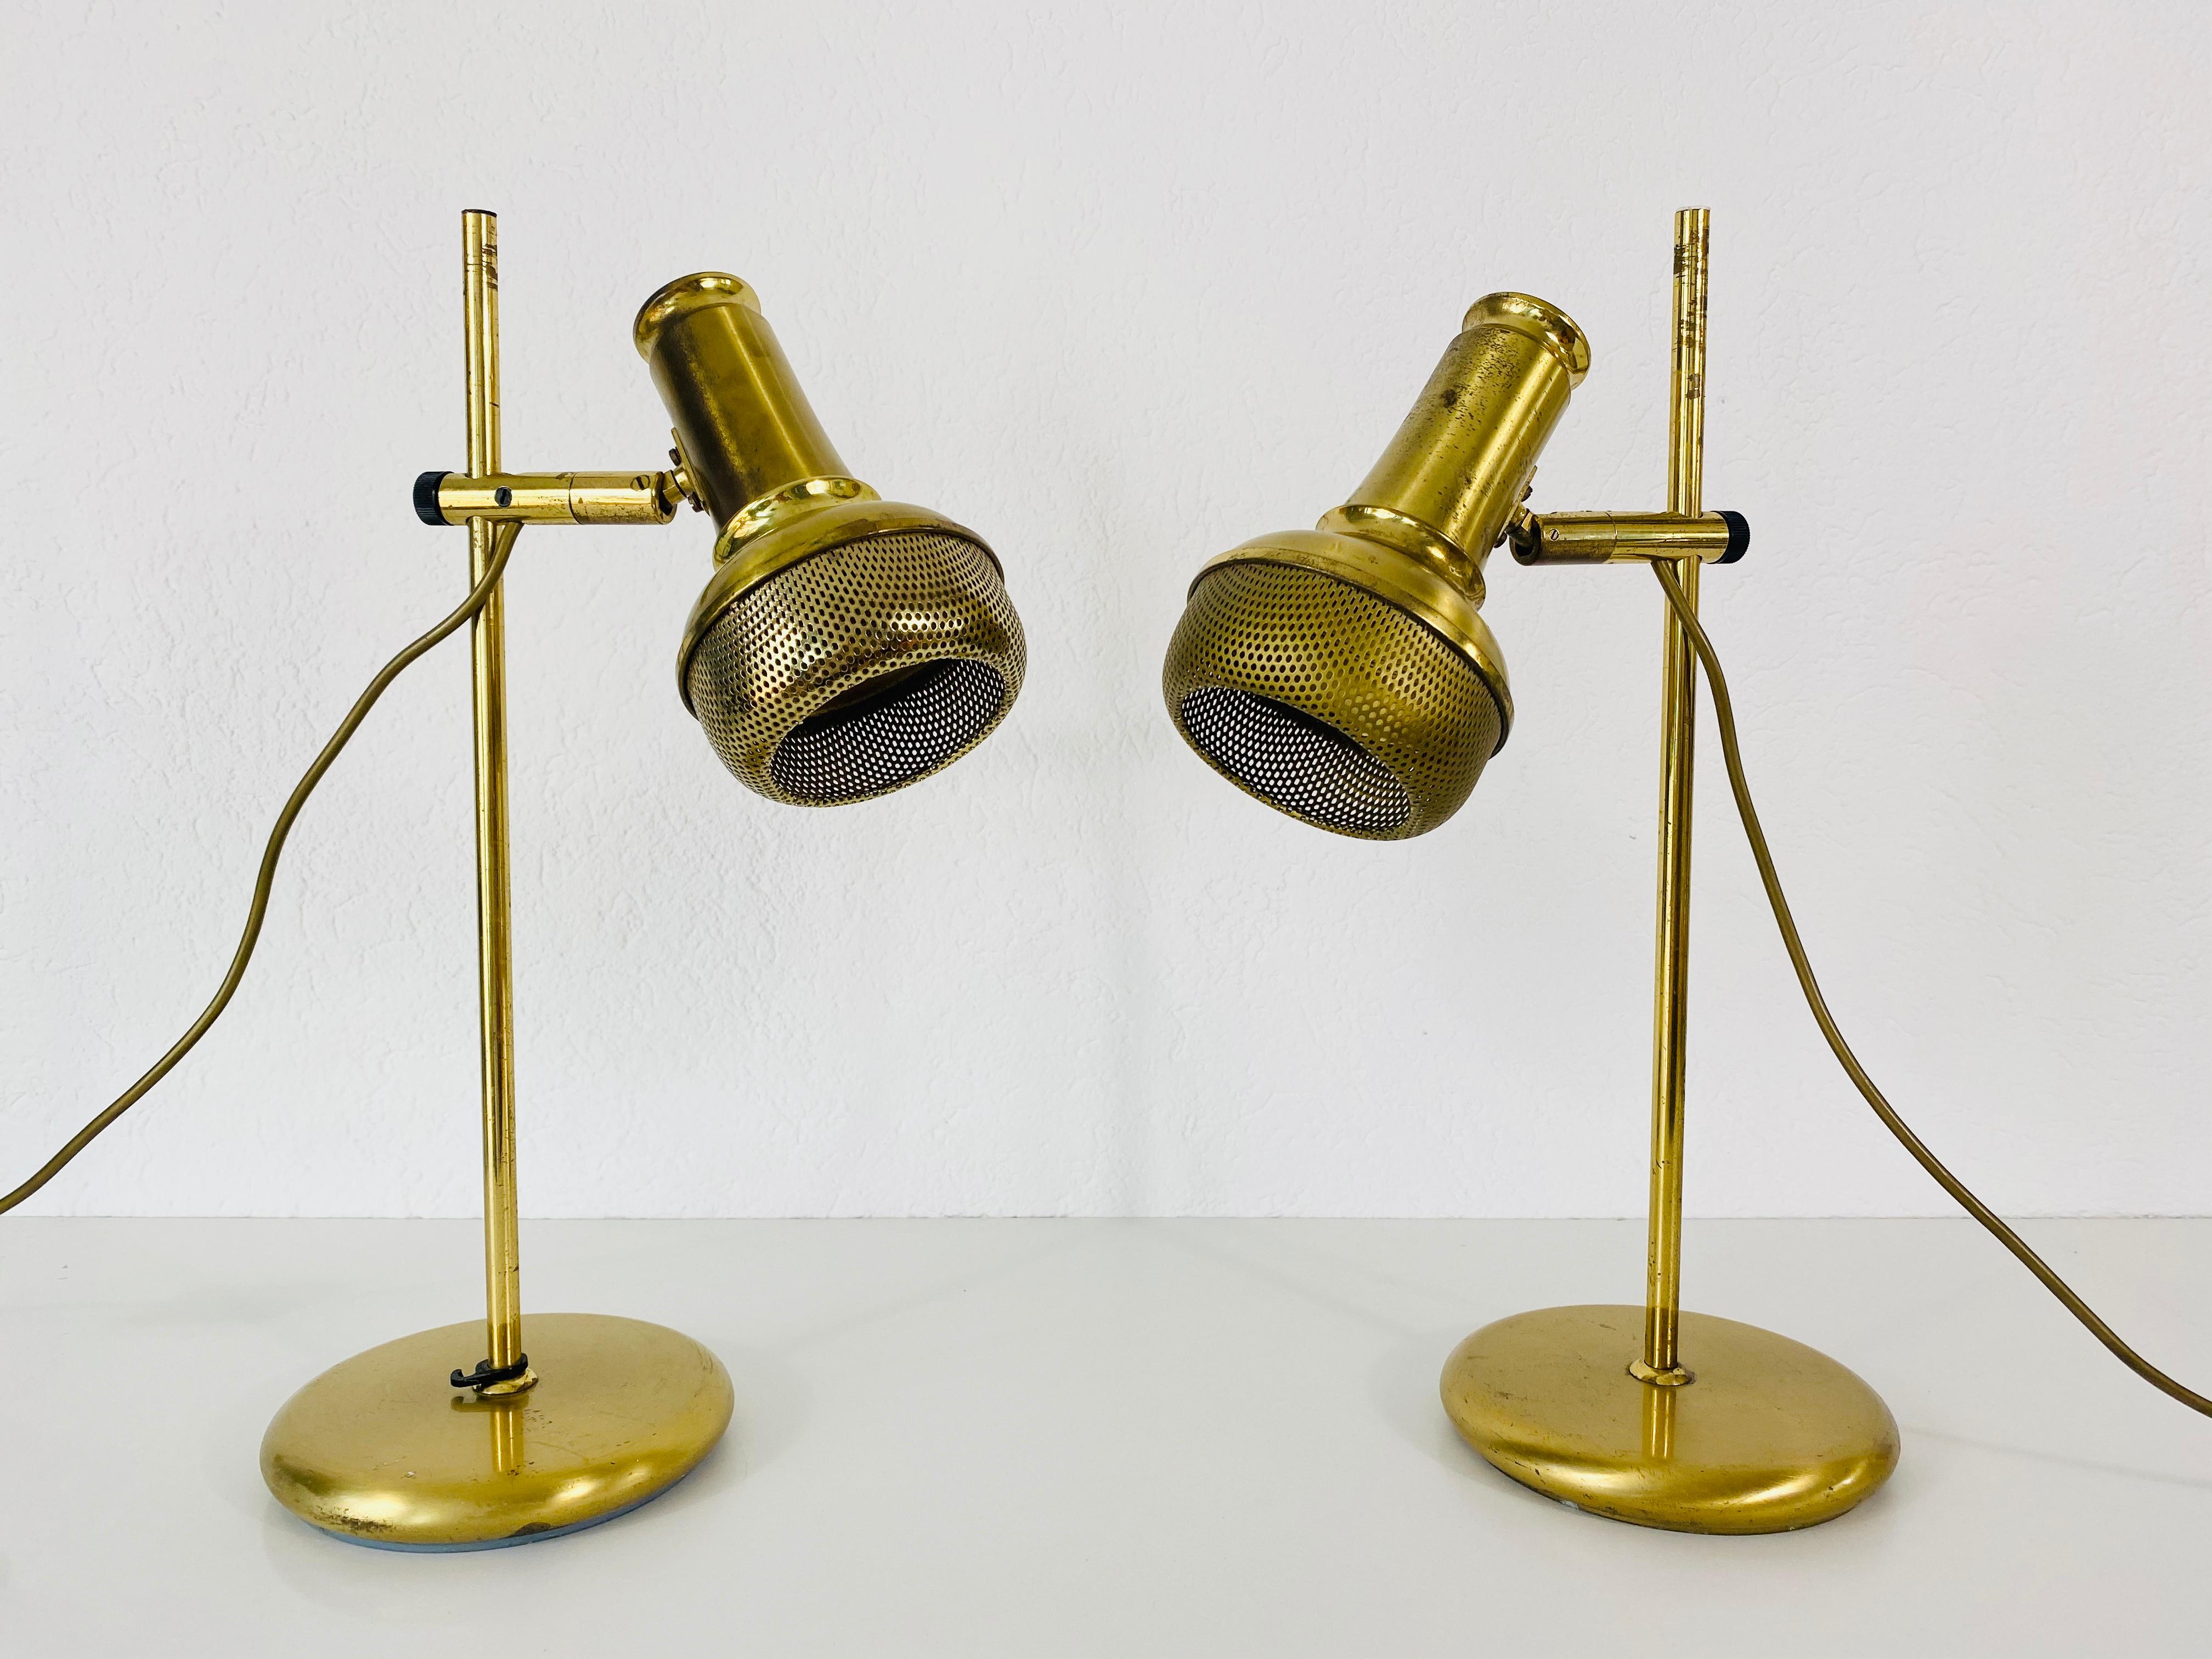 A beautiful pair of midcentury table lamps made in Germany in the 1960s. It is fascinating with its beautiful color. The table lamps are made of polished brass.

Measurements:

Base diameter 18 cm

Height 49 cm

Length 30 cm

Good vintage